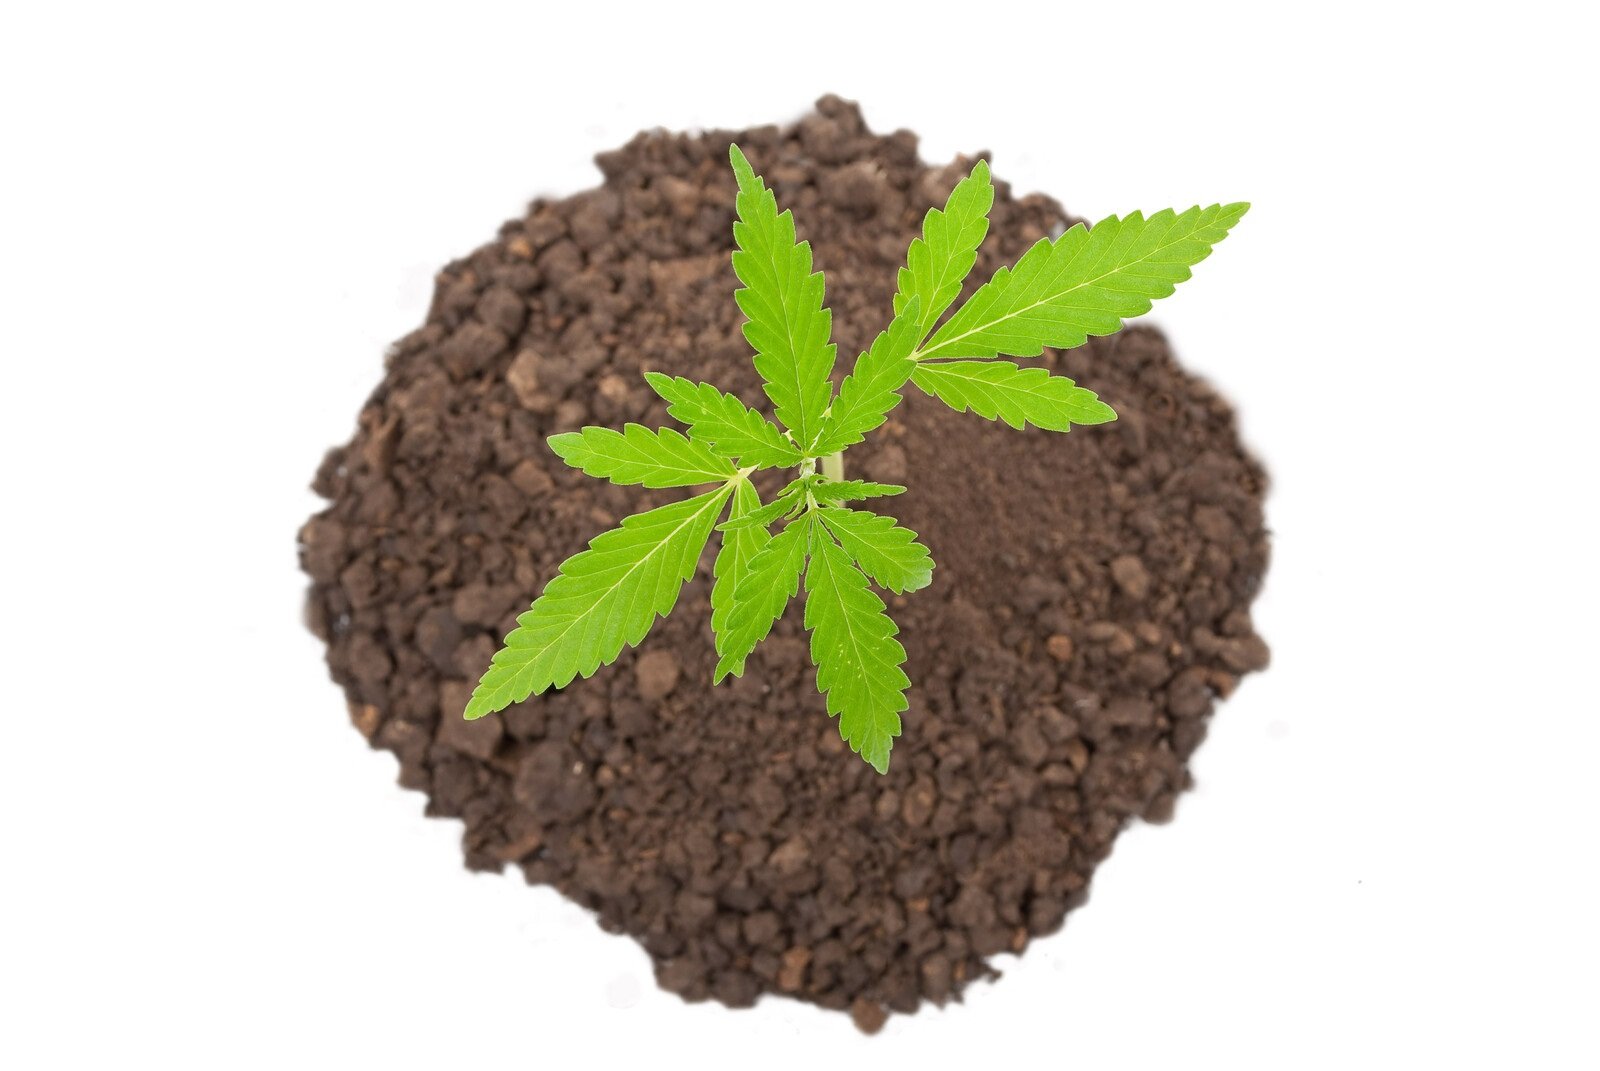 Companion planting for cannabis growing